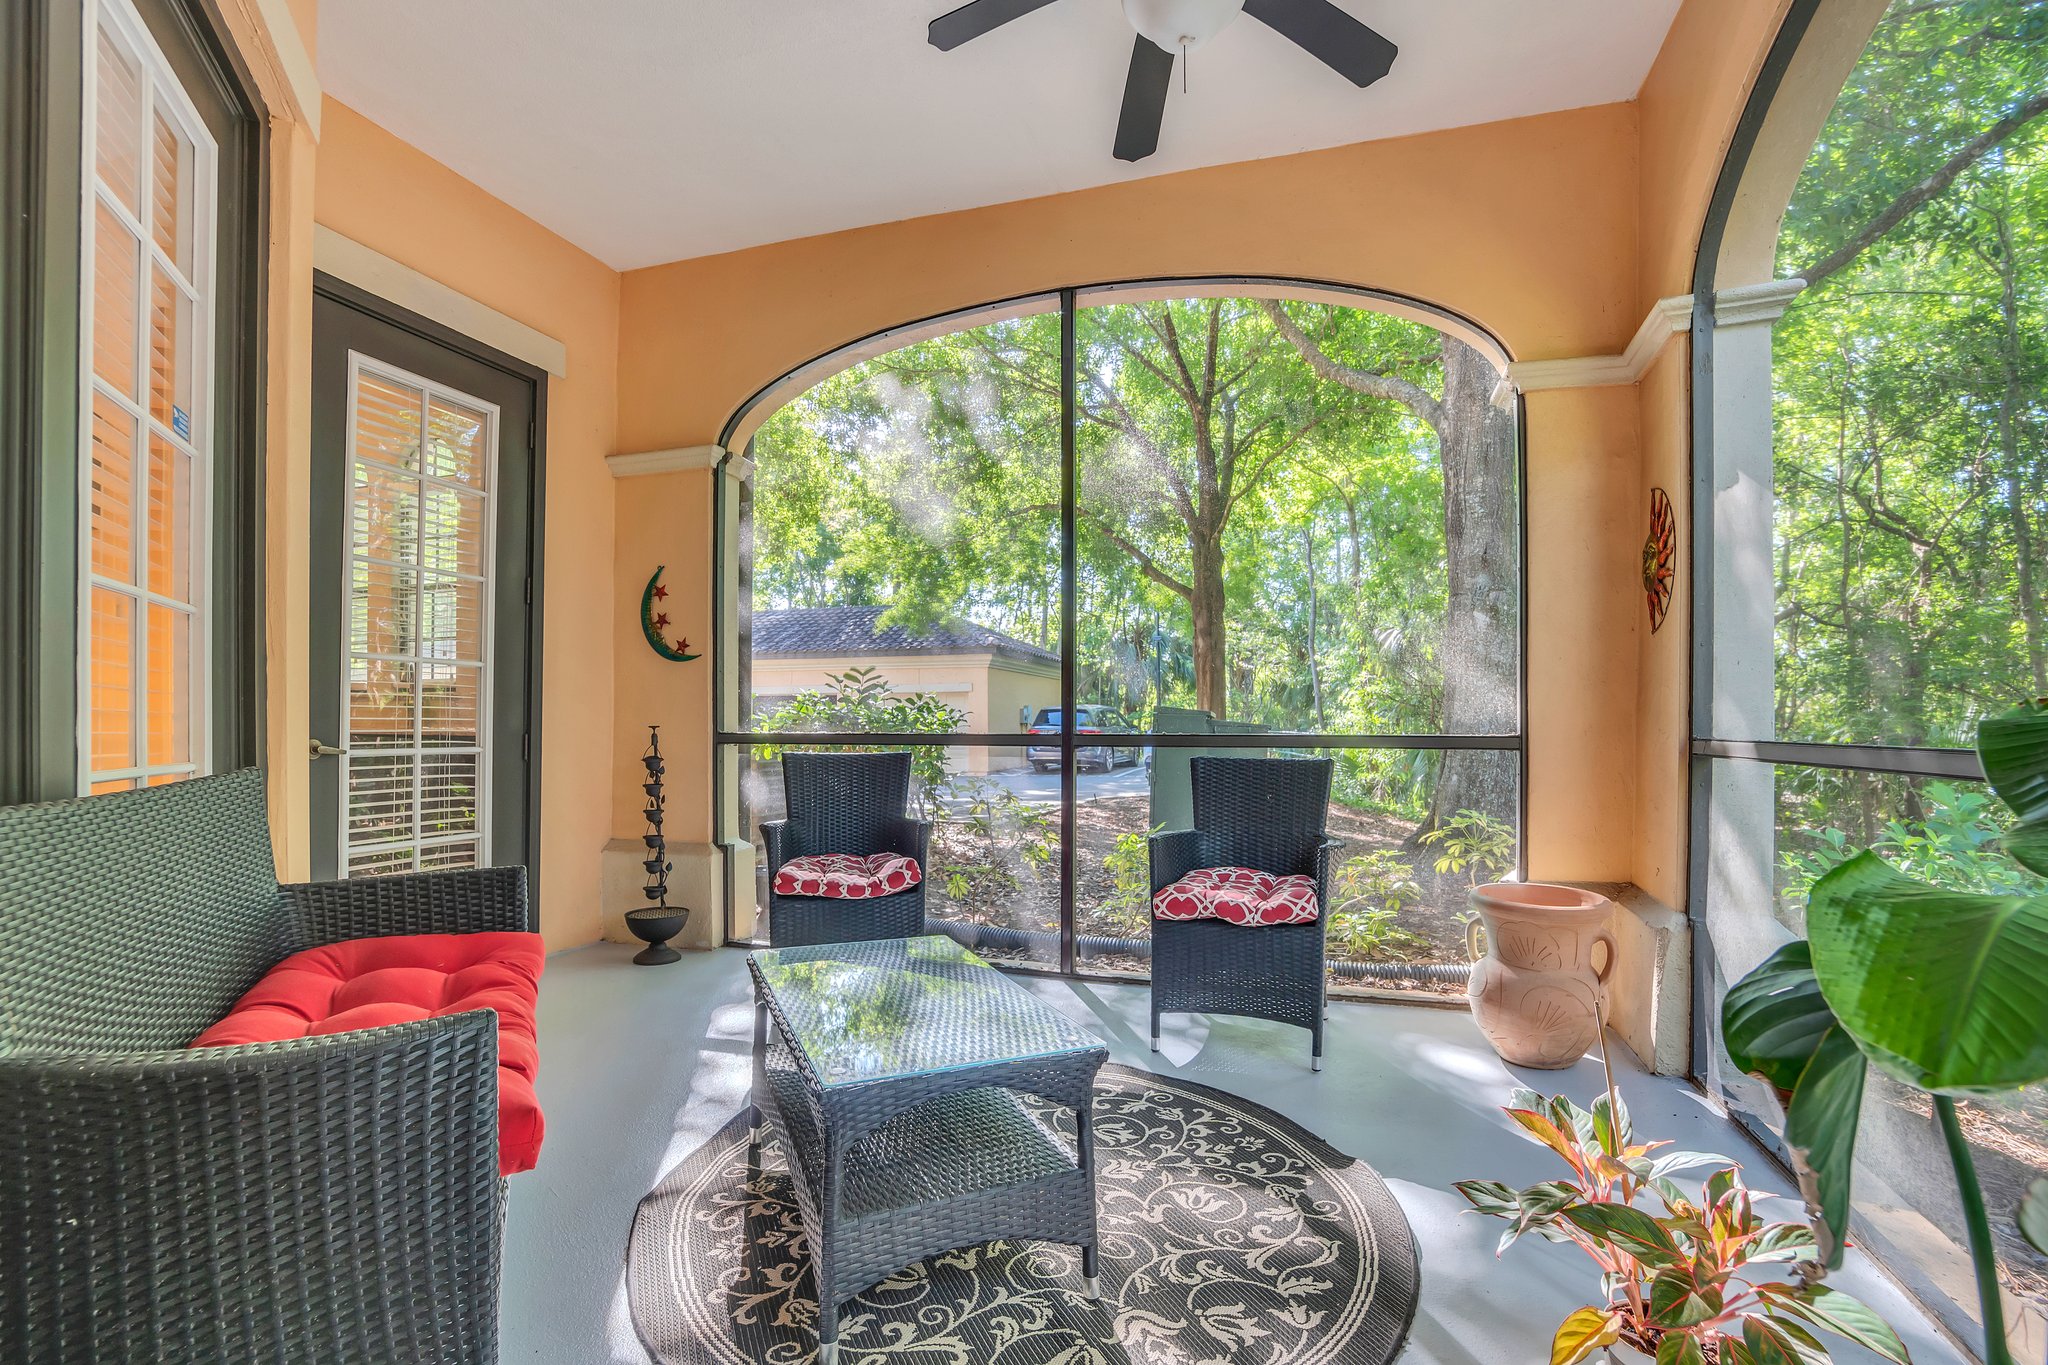 Private patio with great views of trees, tennis courts, and canal